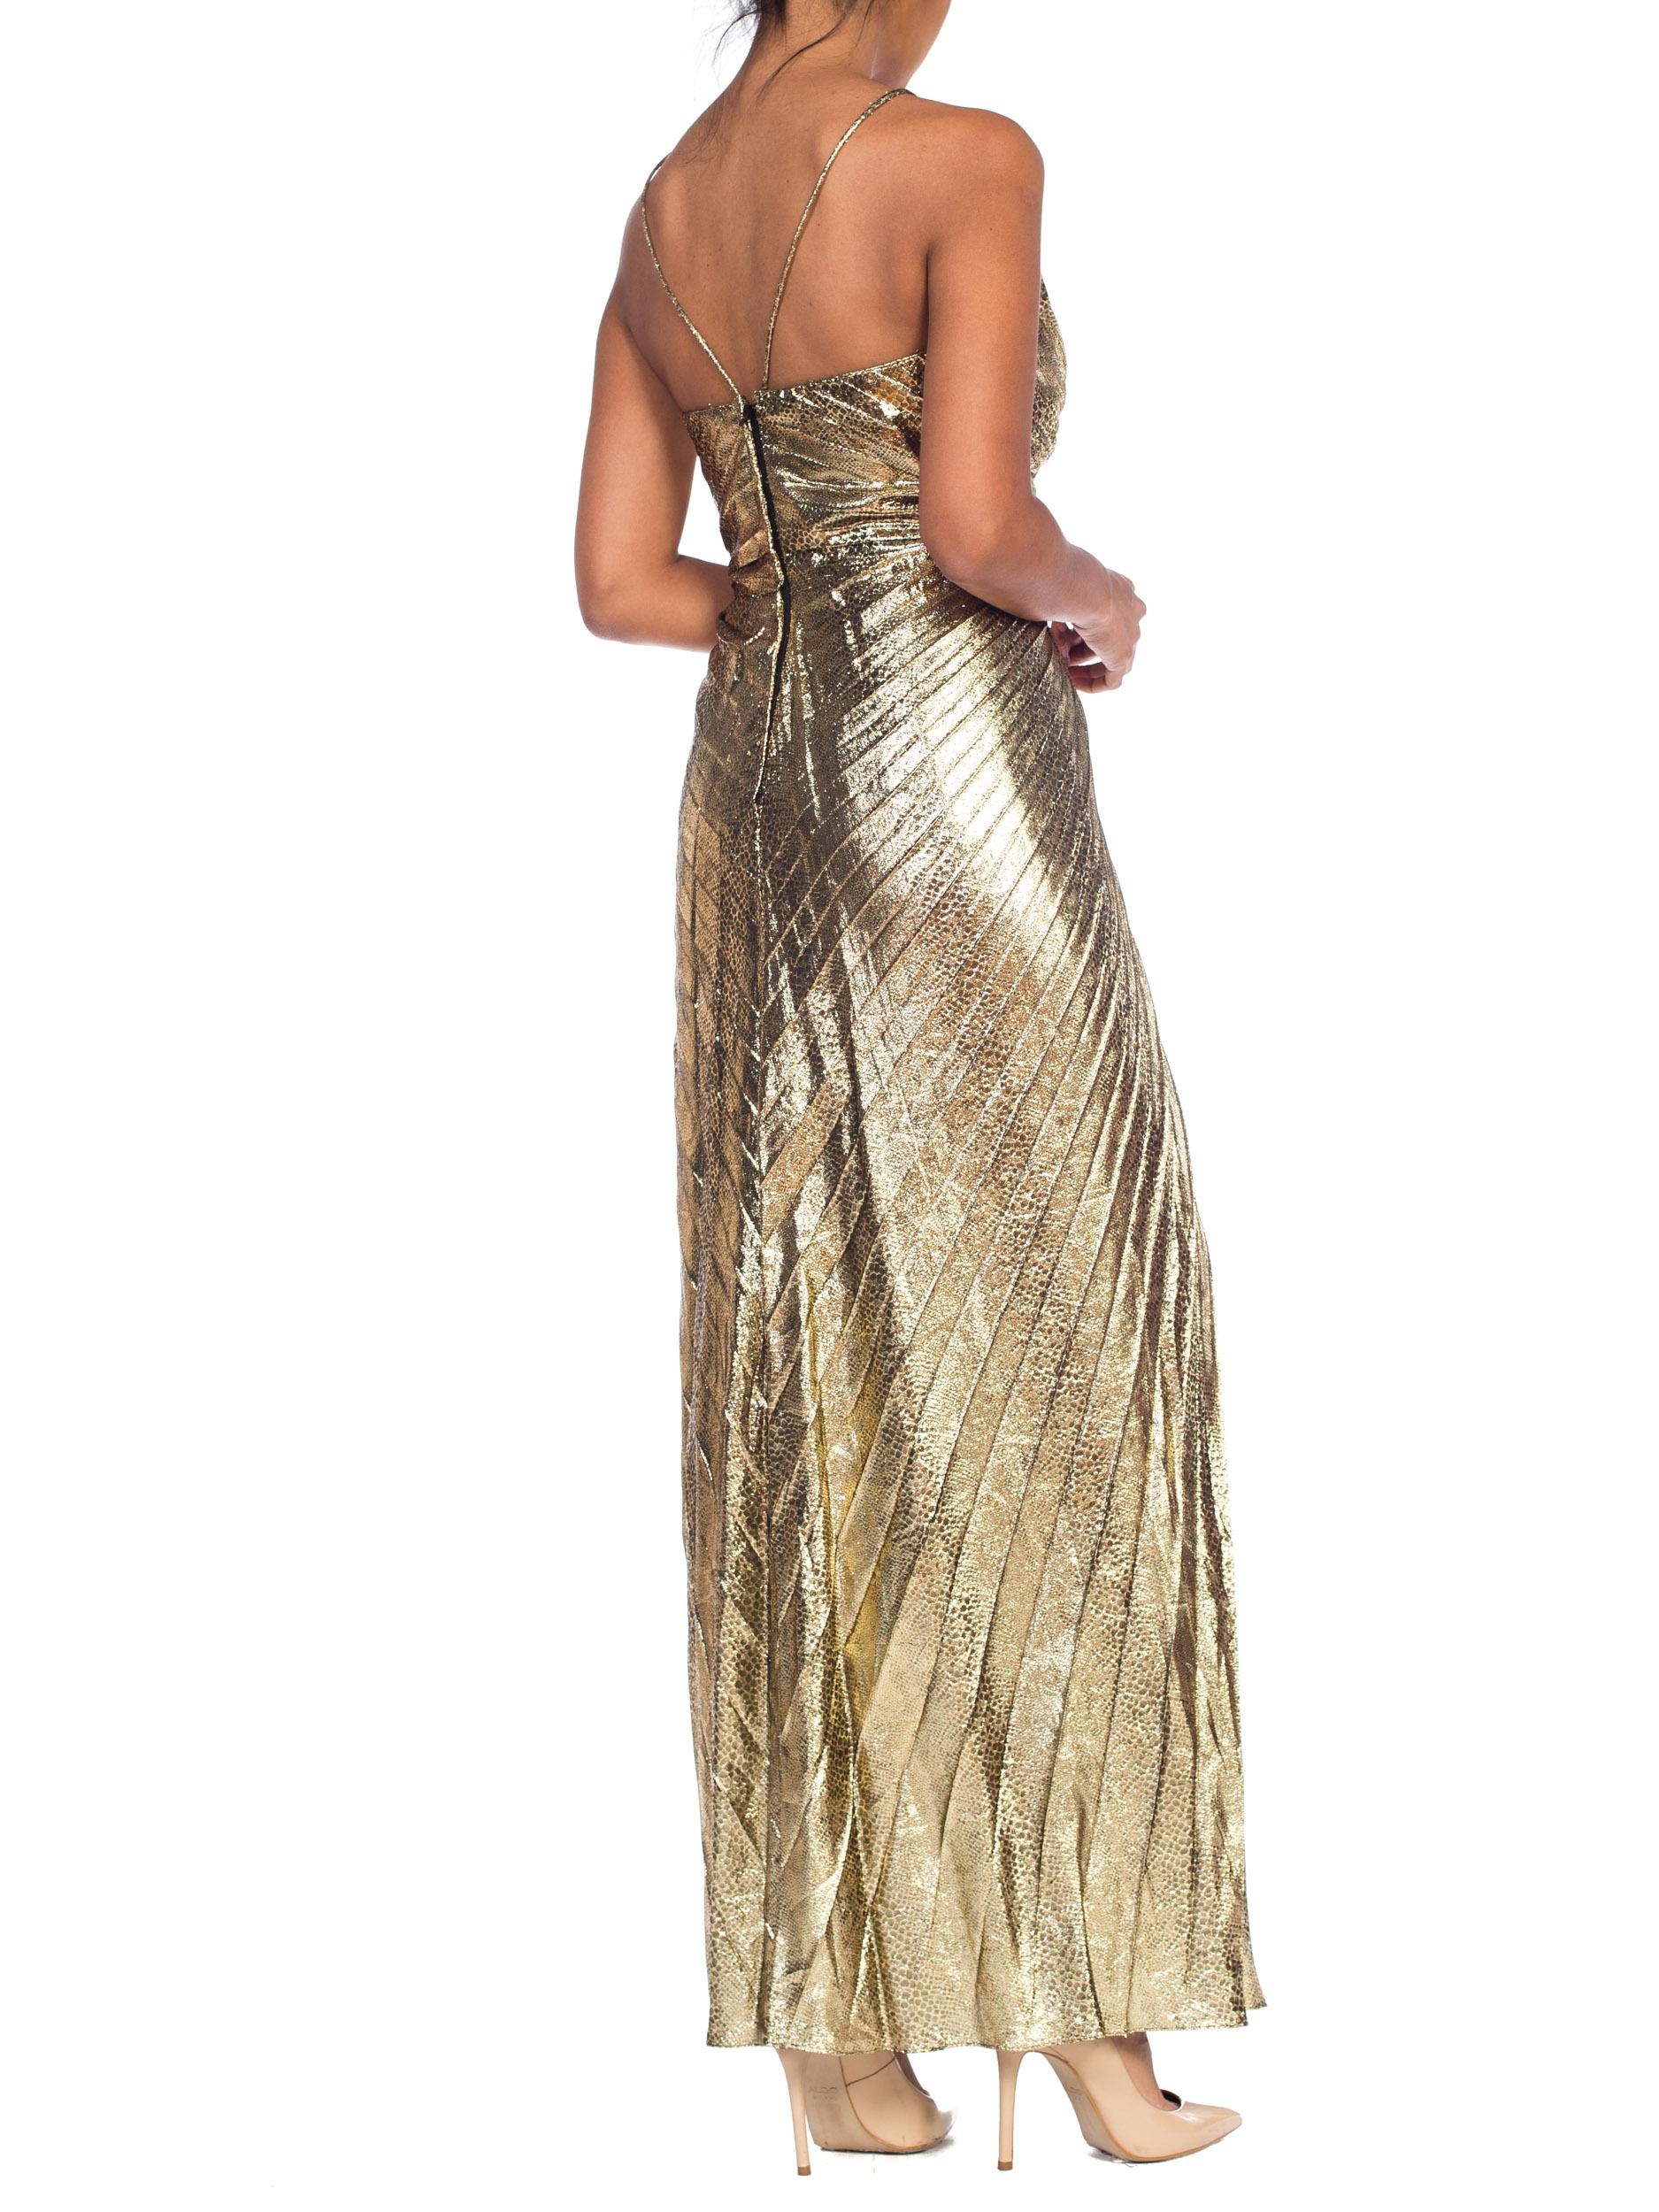 Iconic Travilla Gold Lamé Marilyn Monroe Disco Halter Gown at 1stDibs